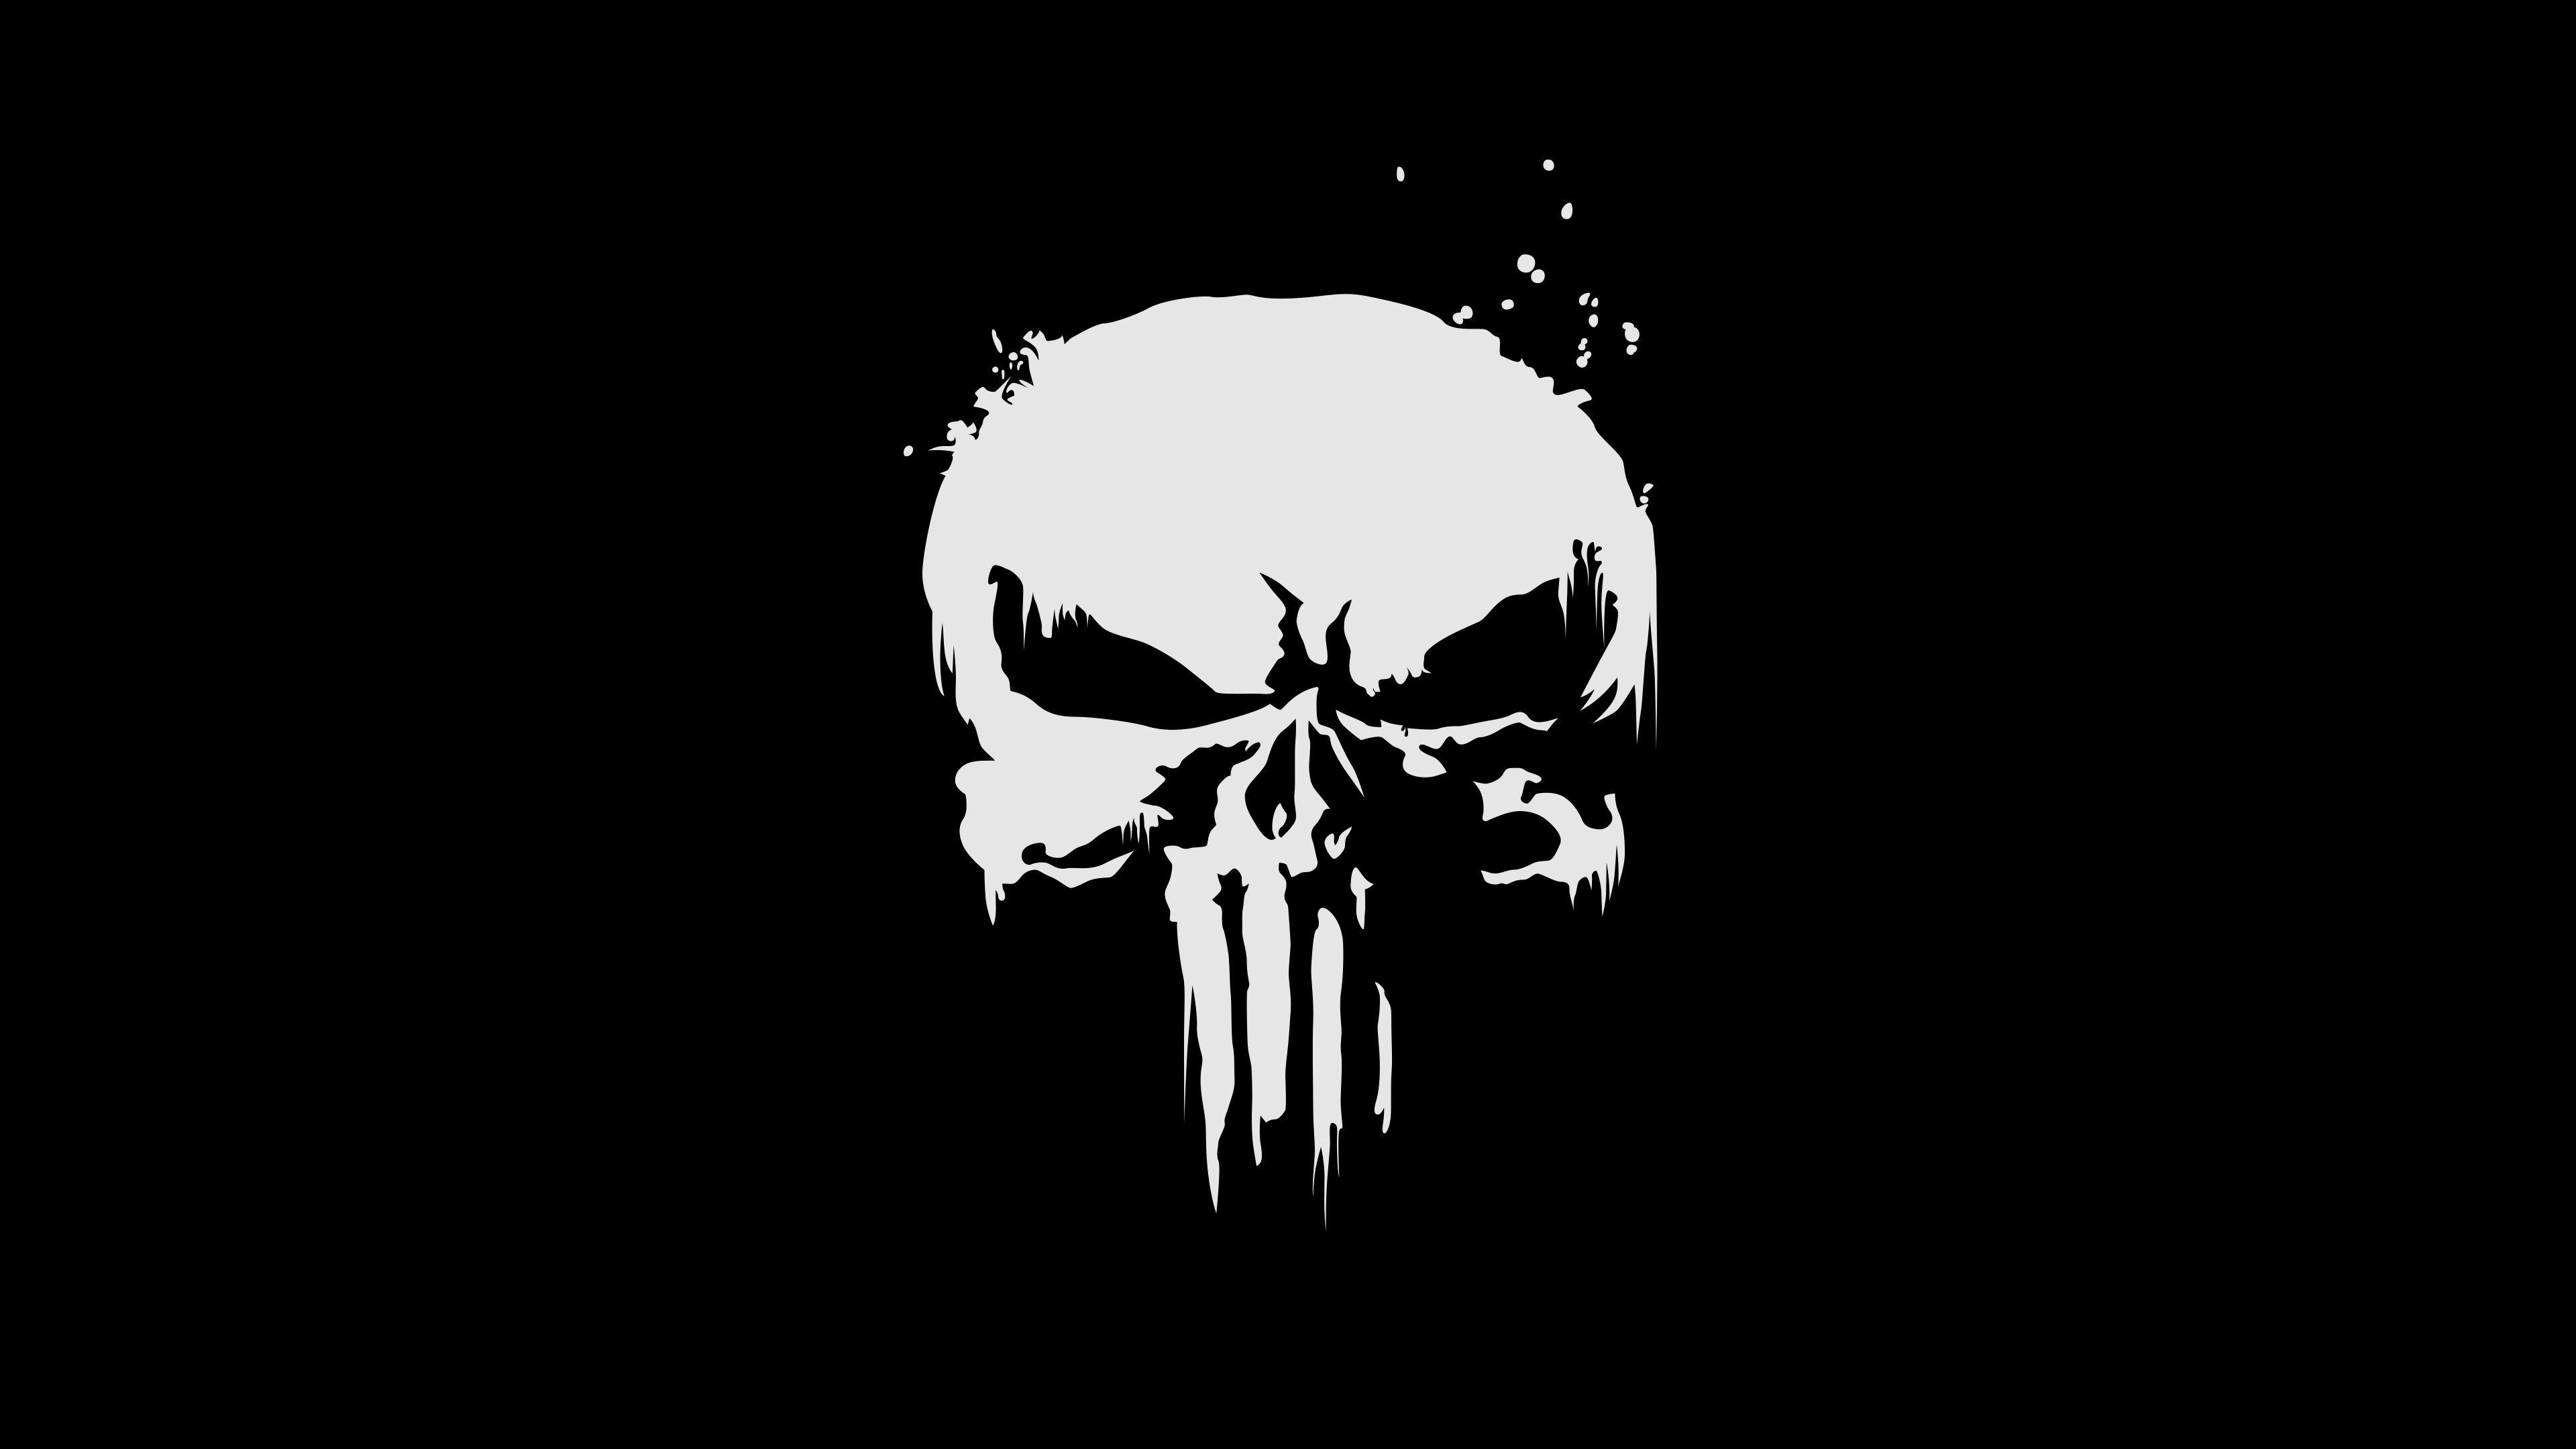 The Punisher HD Wallpaper and Background Image